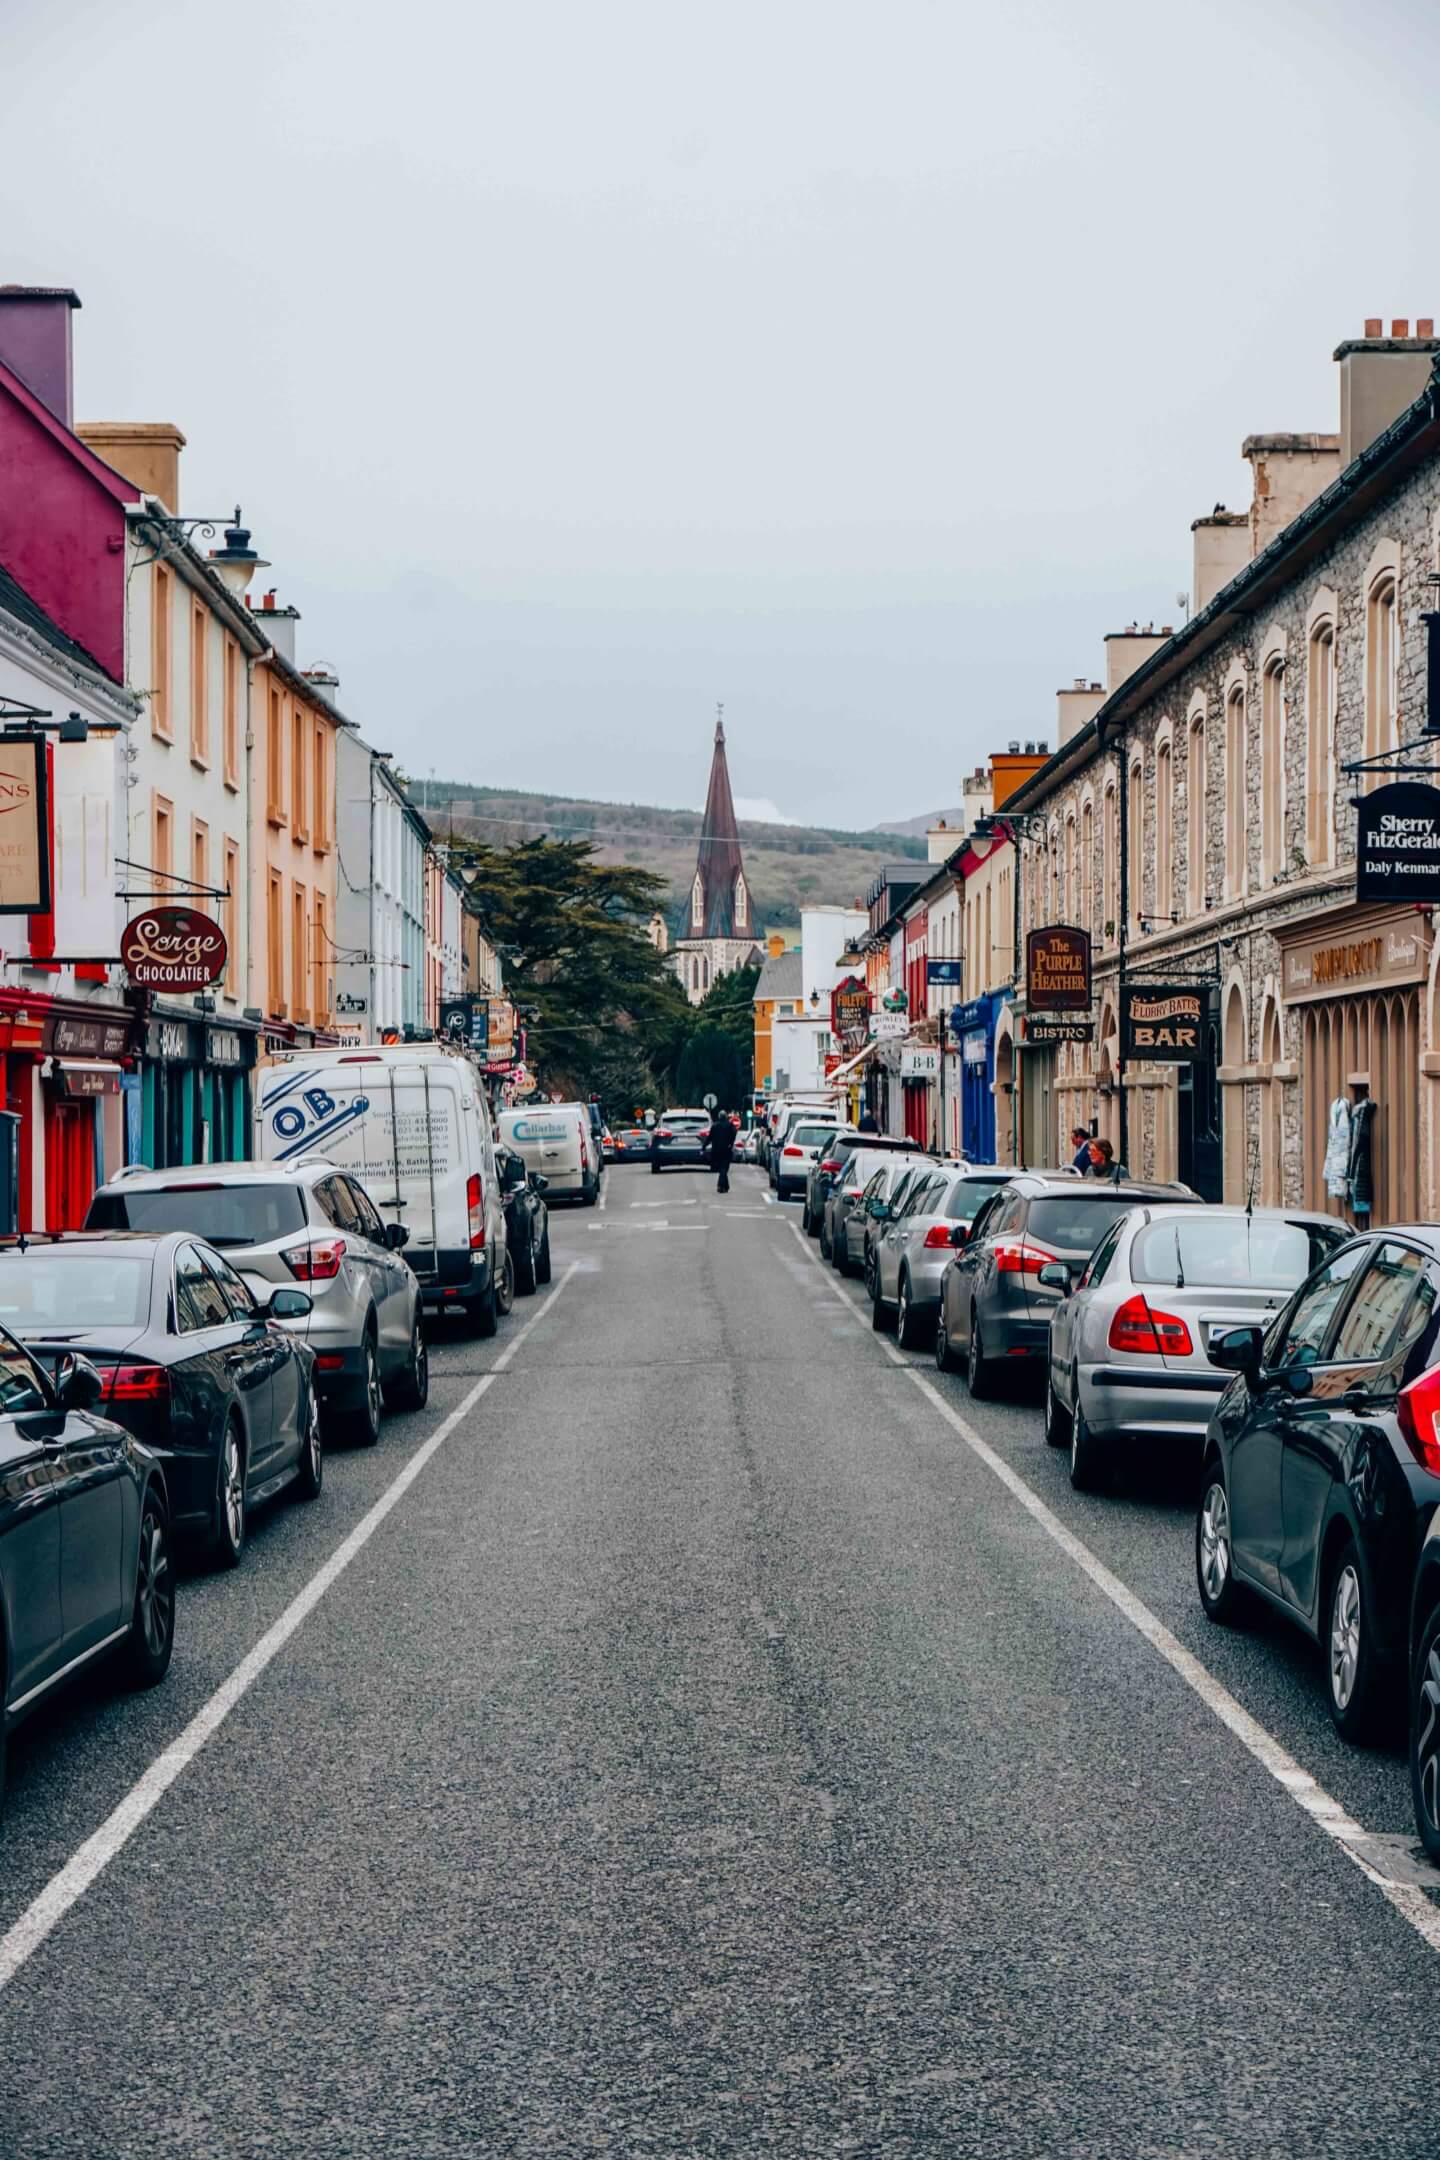 Long colourful street of Kenmare in Ireland